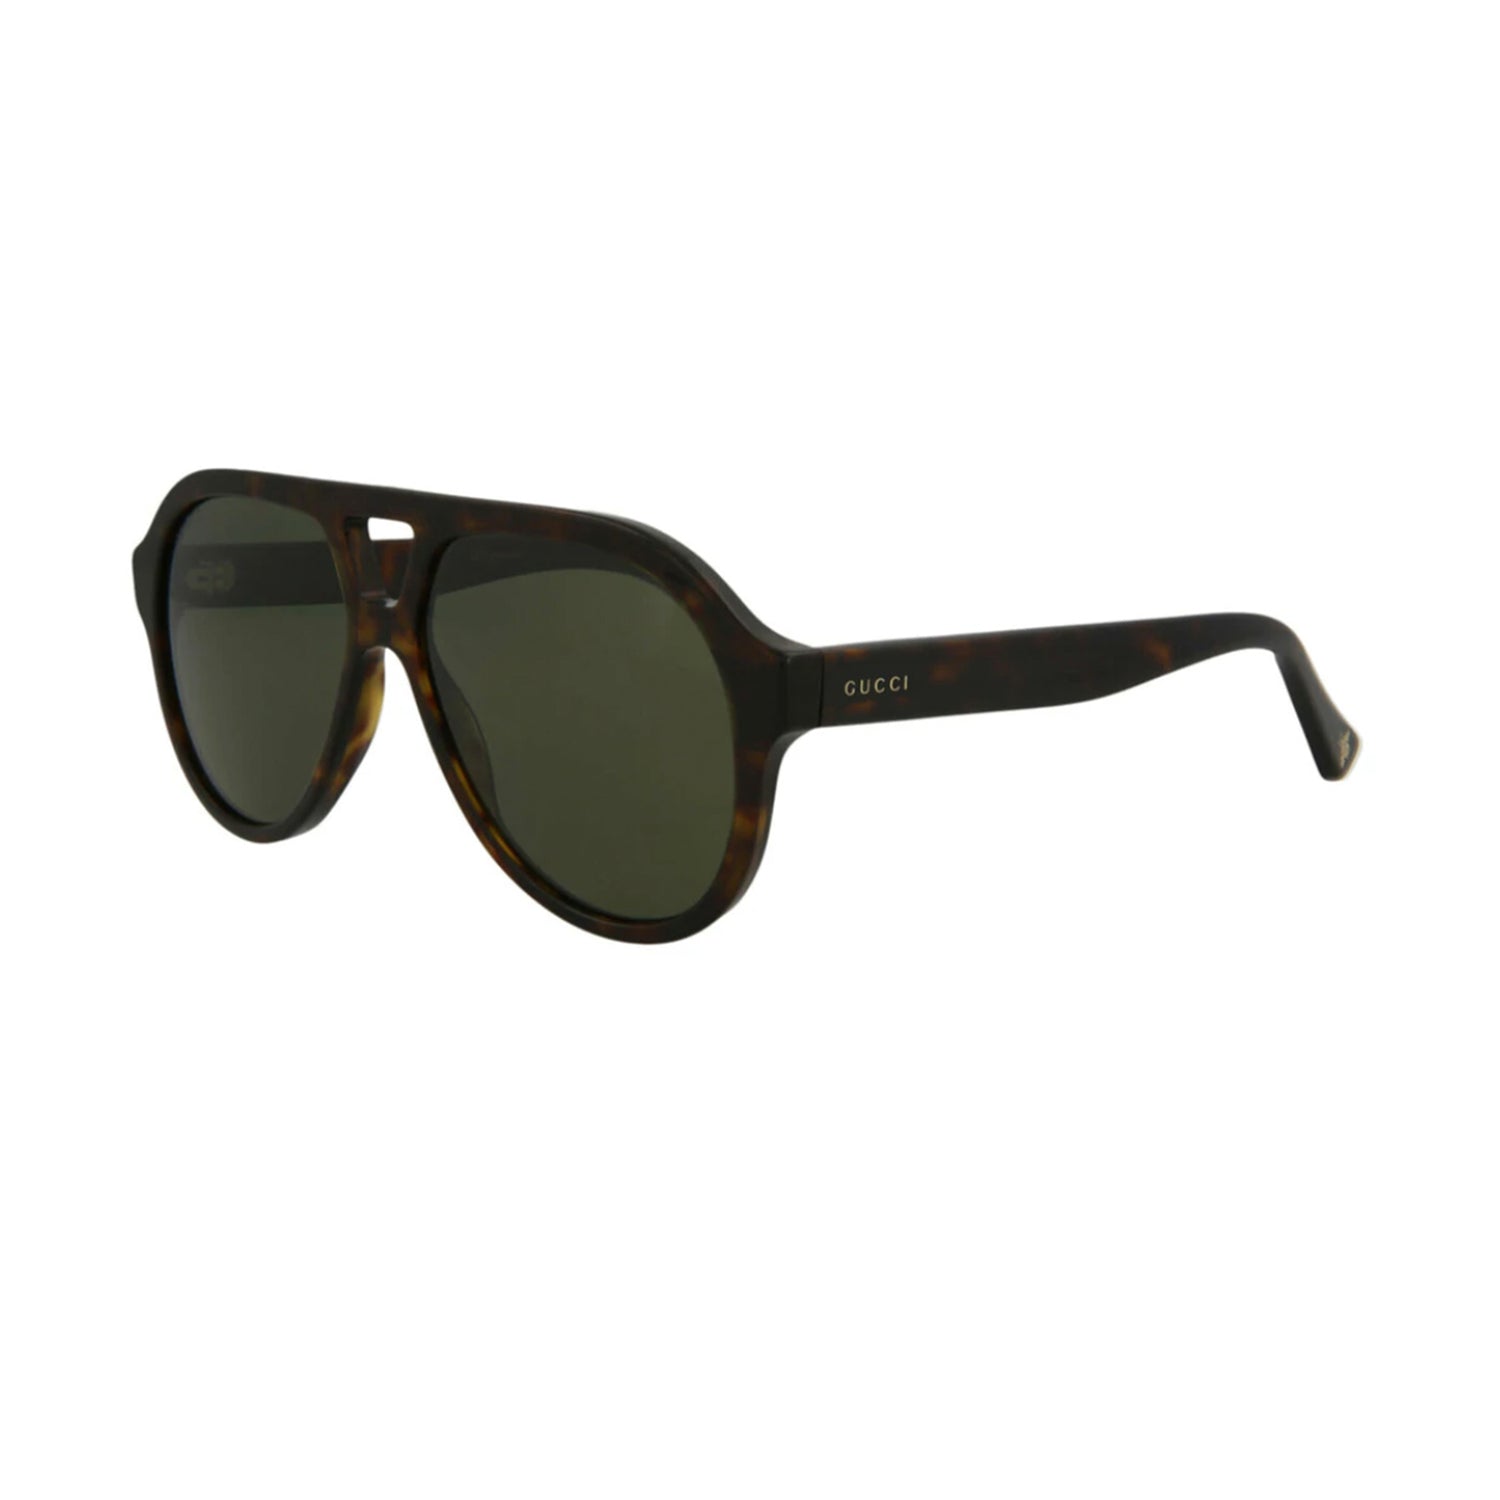 Gucci Best Sunglasses MSRP $305. A new take on a classic aviator frame, Gucci have made it their own with a thicker frame in a combination of black front and bottle green arms. Detailed with gold toned stripes on both sides, sitting next to the Gucci branding